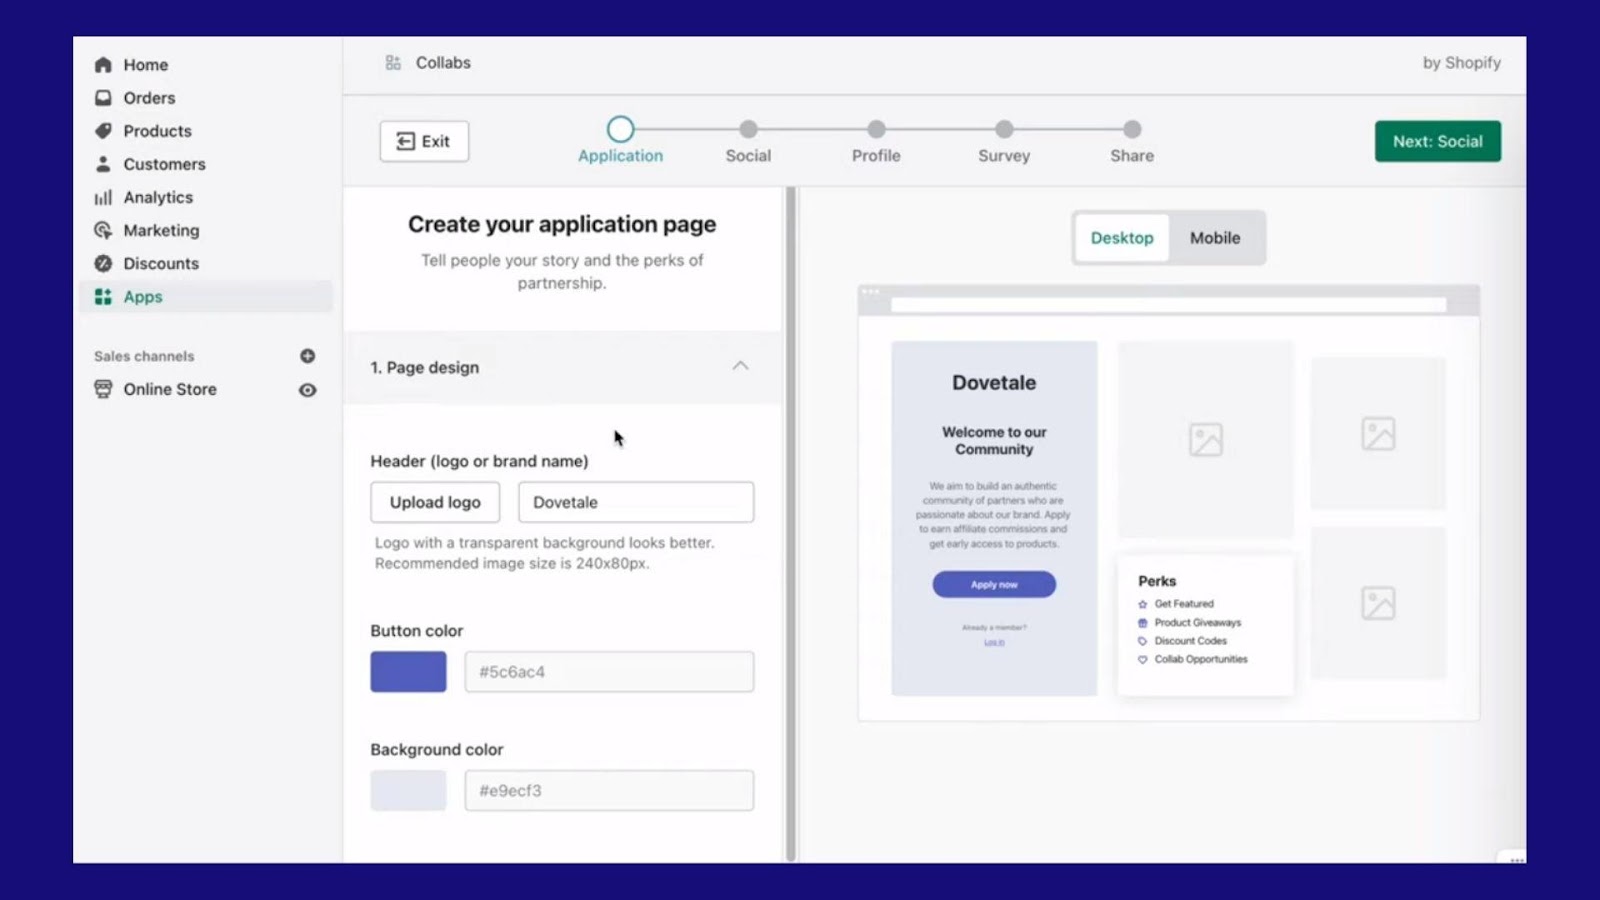 Screenshot from Shopify Collabs interface, showing the setup process.